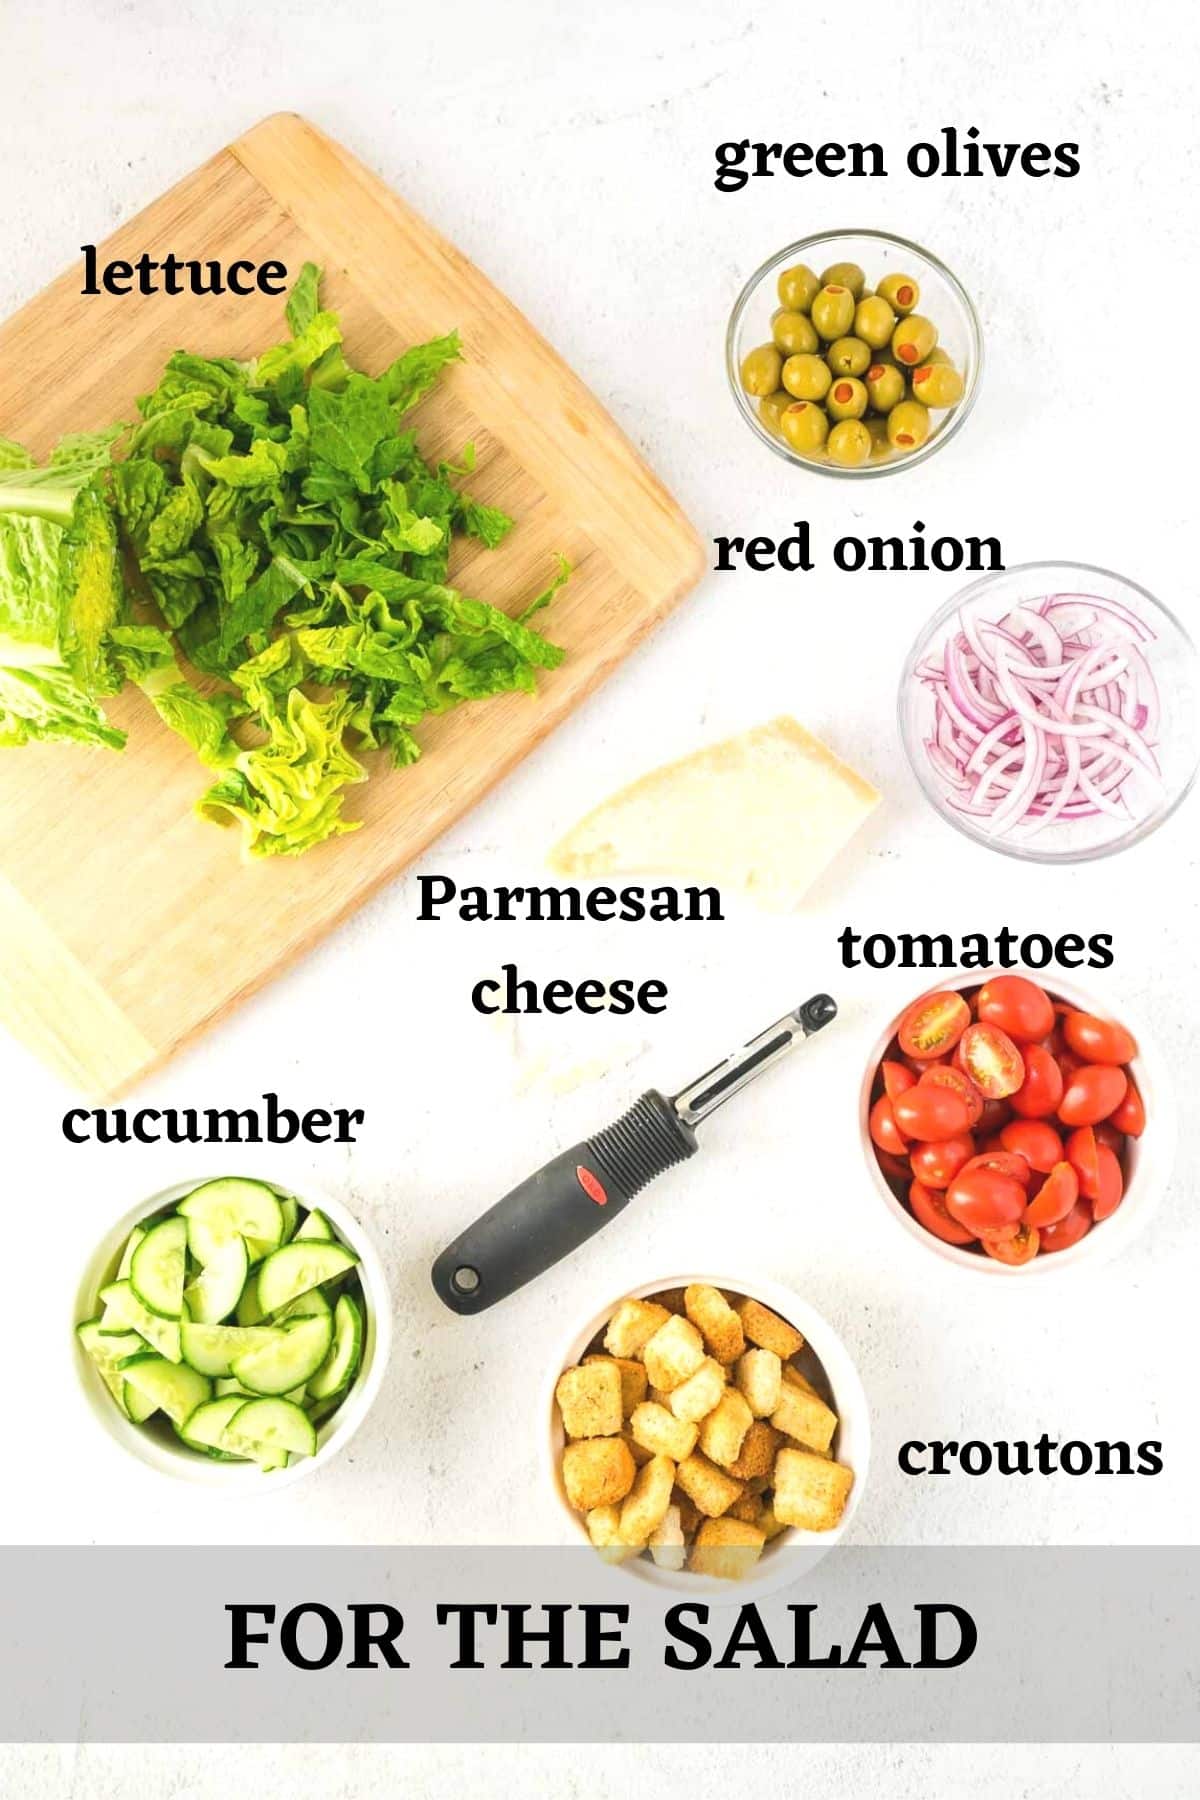 Ingredients to make a tossed green salad for a crowd.